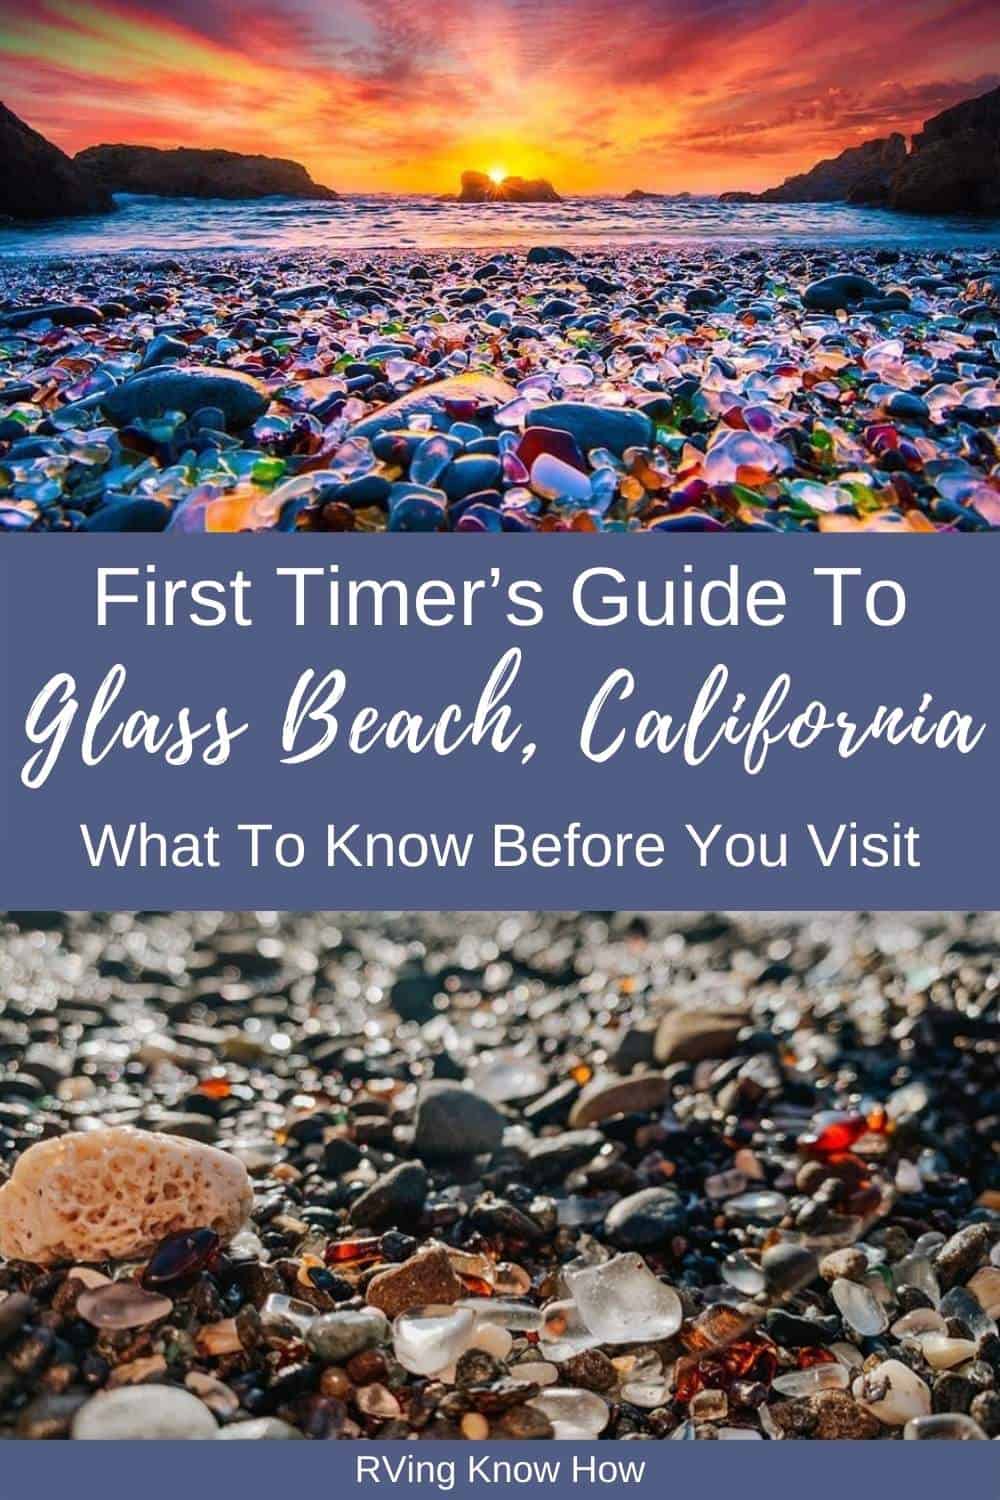 First Timer’s Guide To Glass Beach, California_ Things To Know Before You Visit